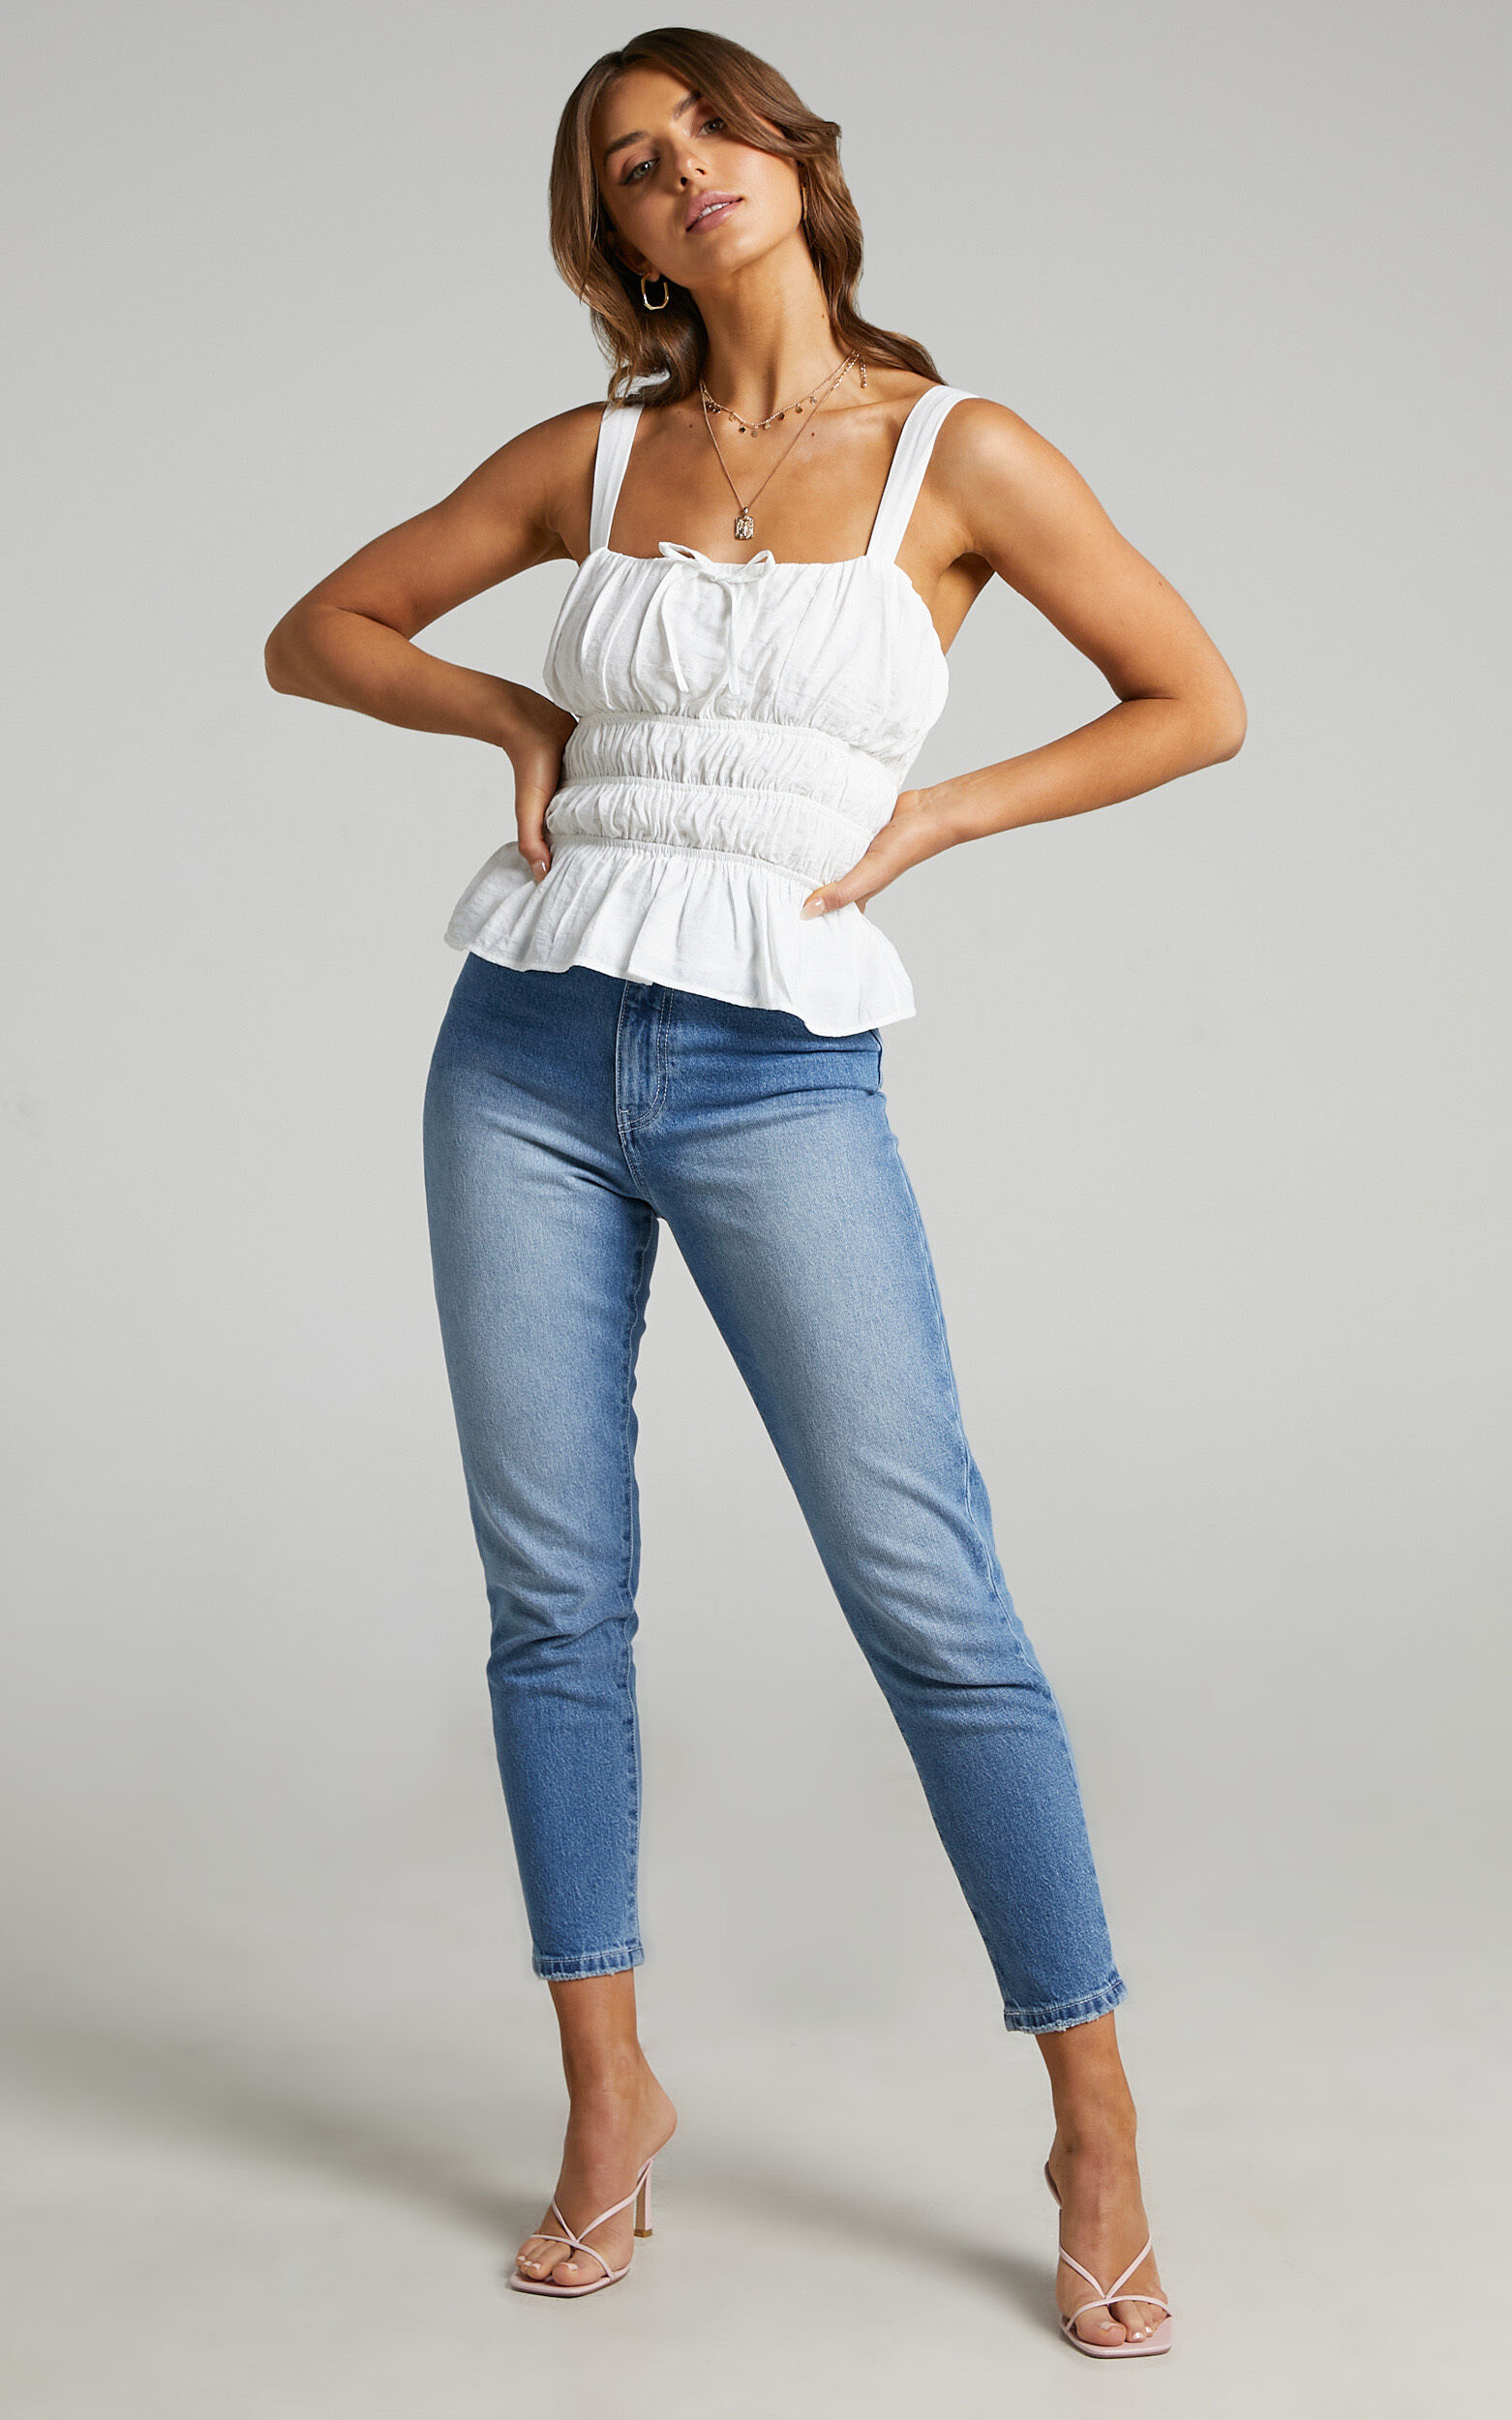 Novana Ruched Peplum Top in White - 06, WHT1, super-hi-res image number null